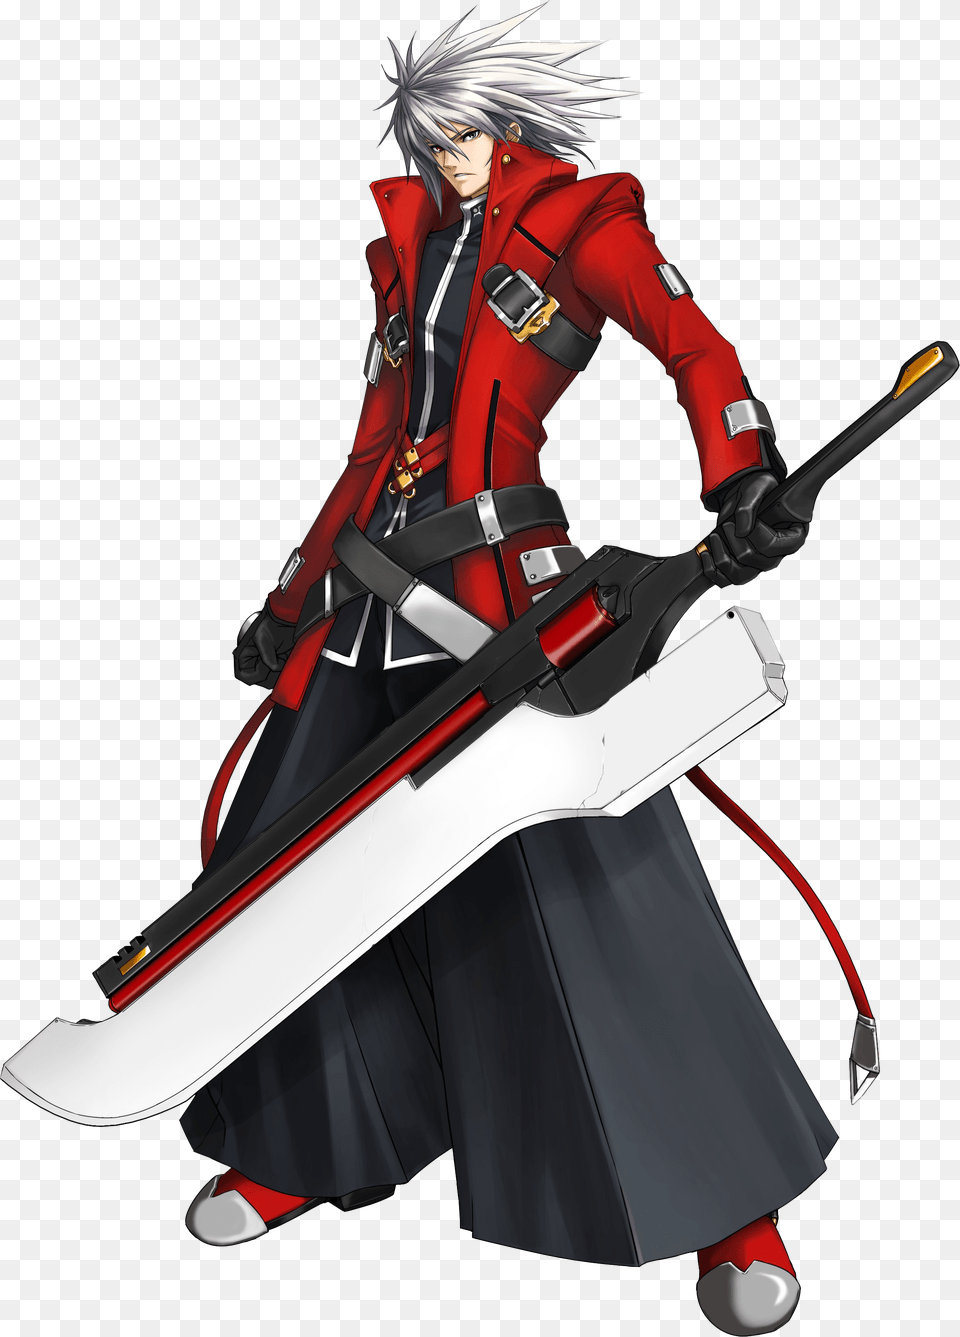 Concept Art Of Ragna The Bloodedge From Blazblue Ragna The Bloodedge Sword, Book, Comics, Publication, Samurai Png Image